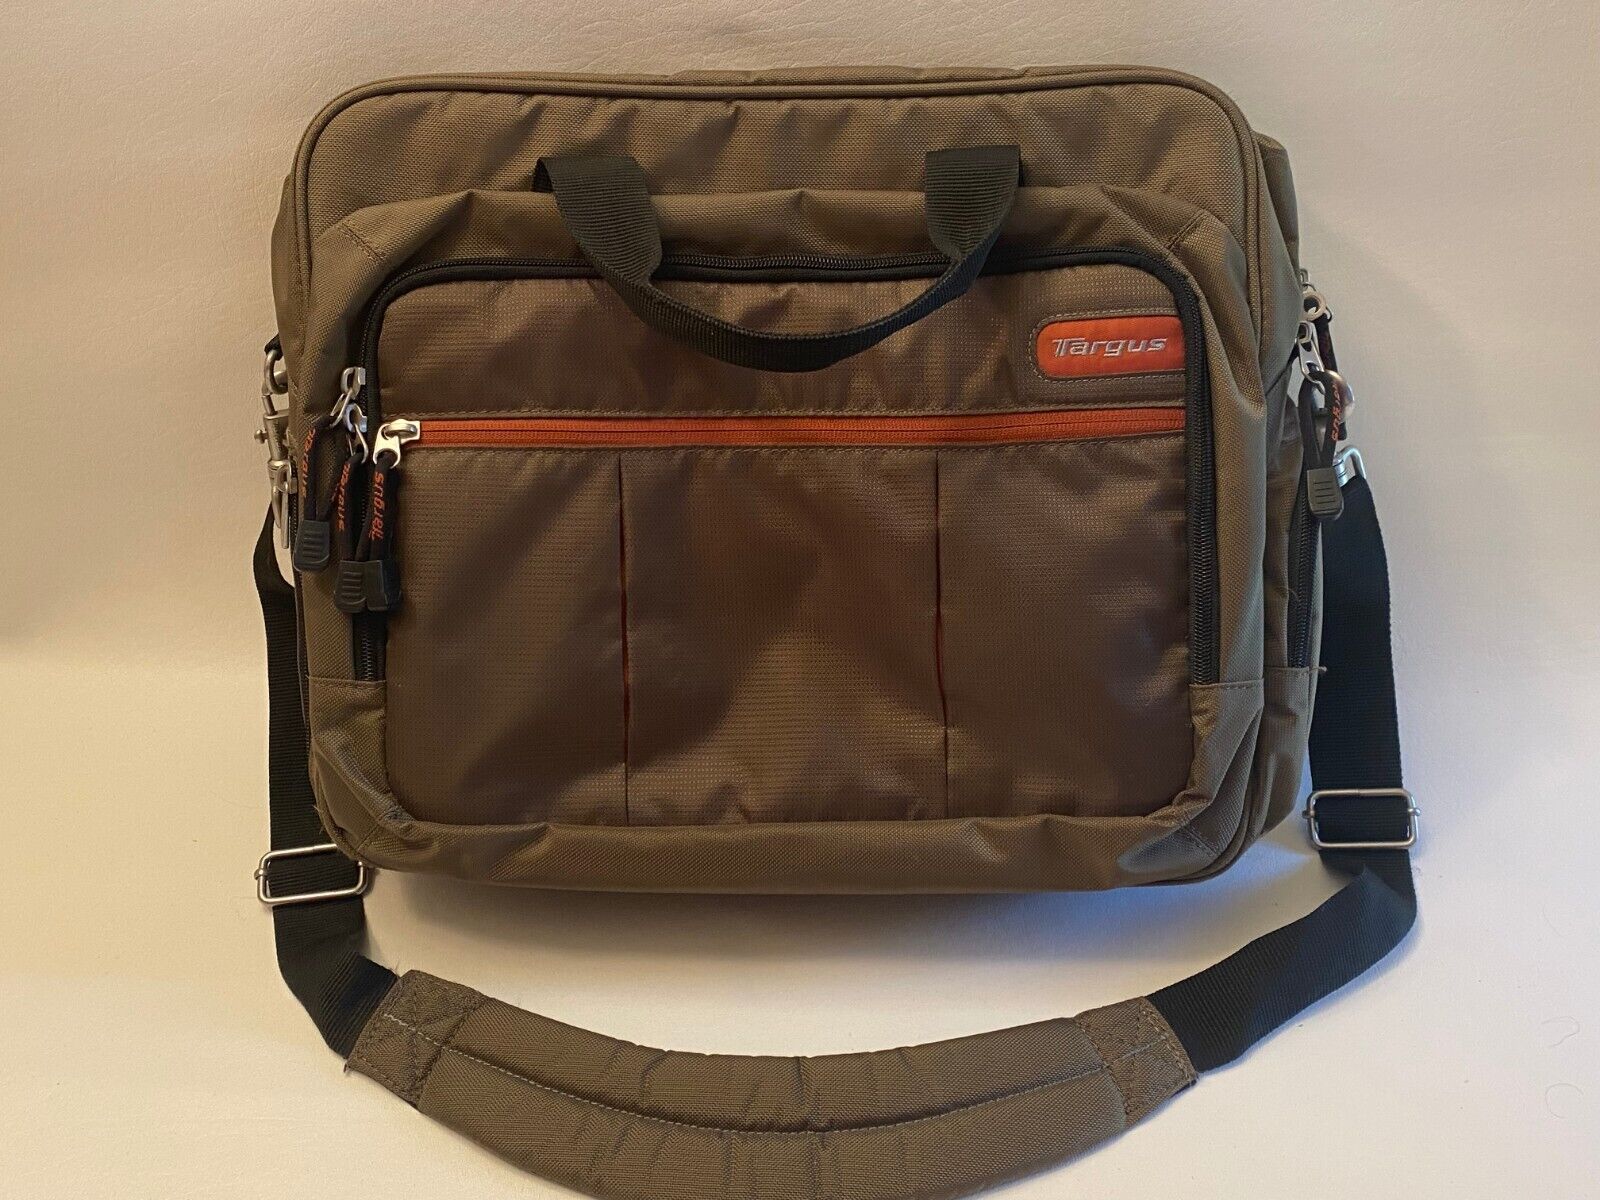 Targus Grove Topload Laptop Bag (Olive with Sedona Accents)